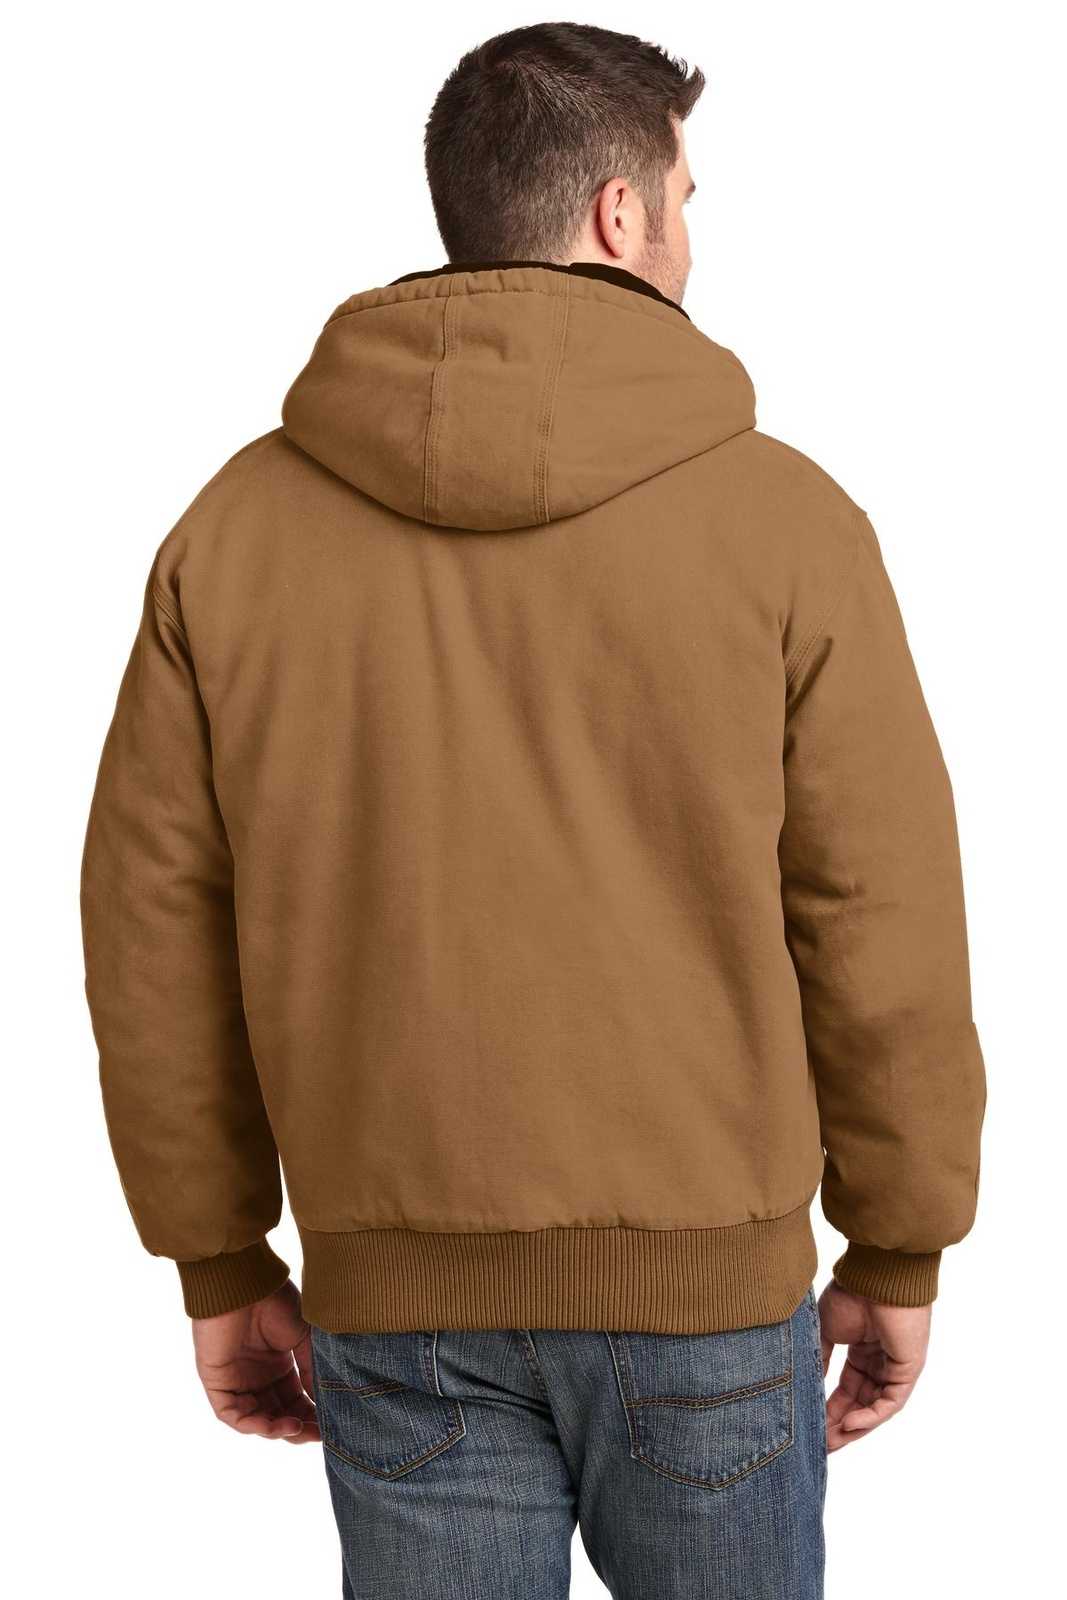 CornerStone CSJ41 Washed Duck Cloth Insulated Hooded Work Jacket - Duck Brown - HIT a Double - 2